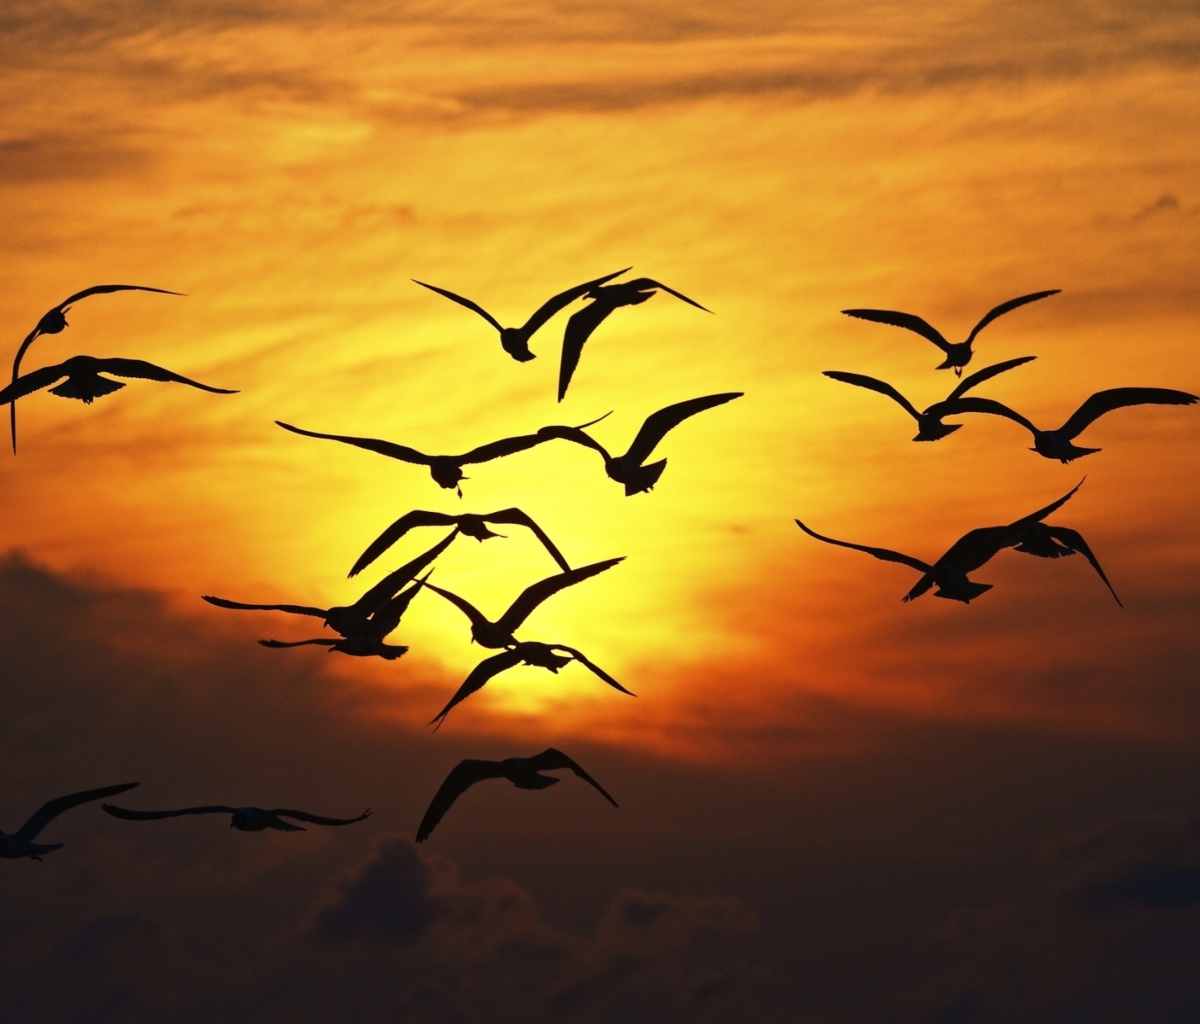 Birds Silhouettes At Sunset wallpaper 1200x1024